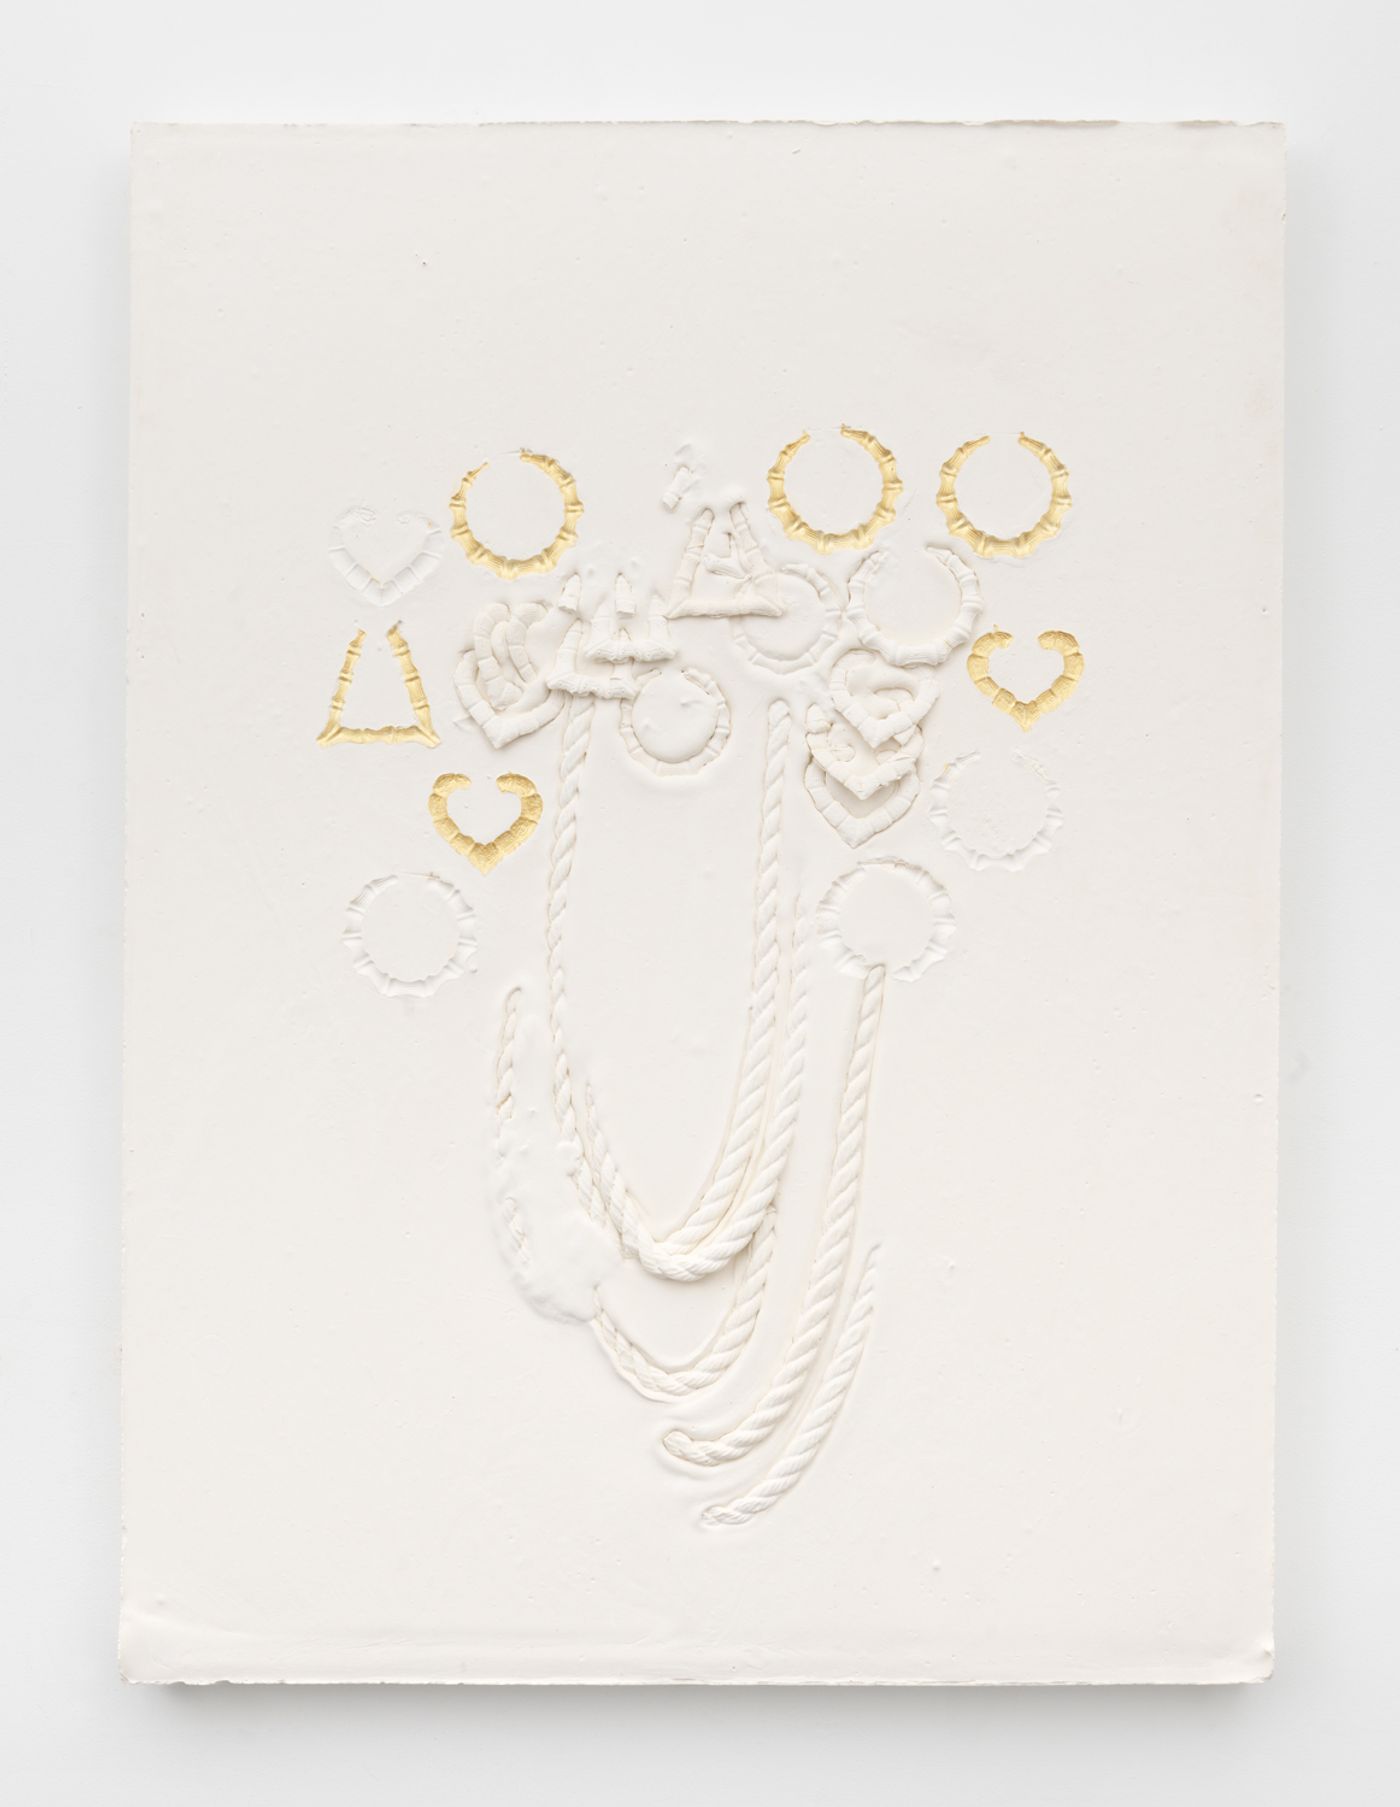 Image of Composition with ropes, round earrings, heart earrings and bamboo earrings, 2019: Plaster and acrylic